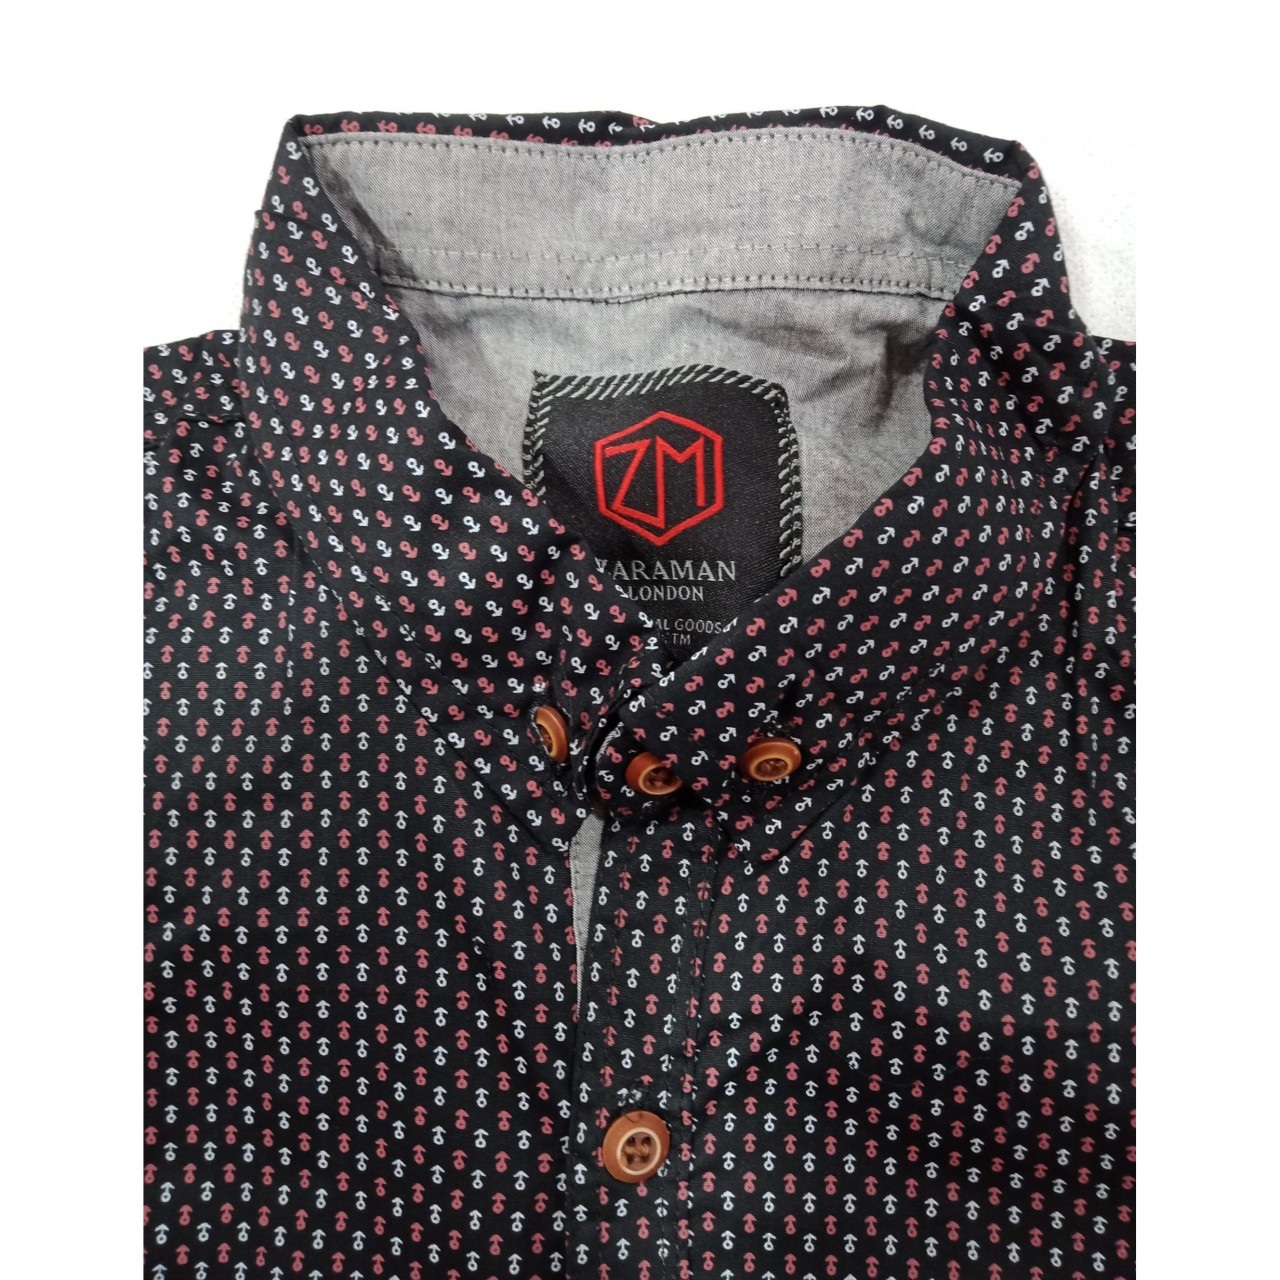 Casual Printed Shirts Perfect In Cool Fitting For Men - Black